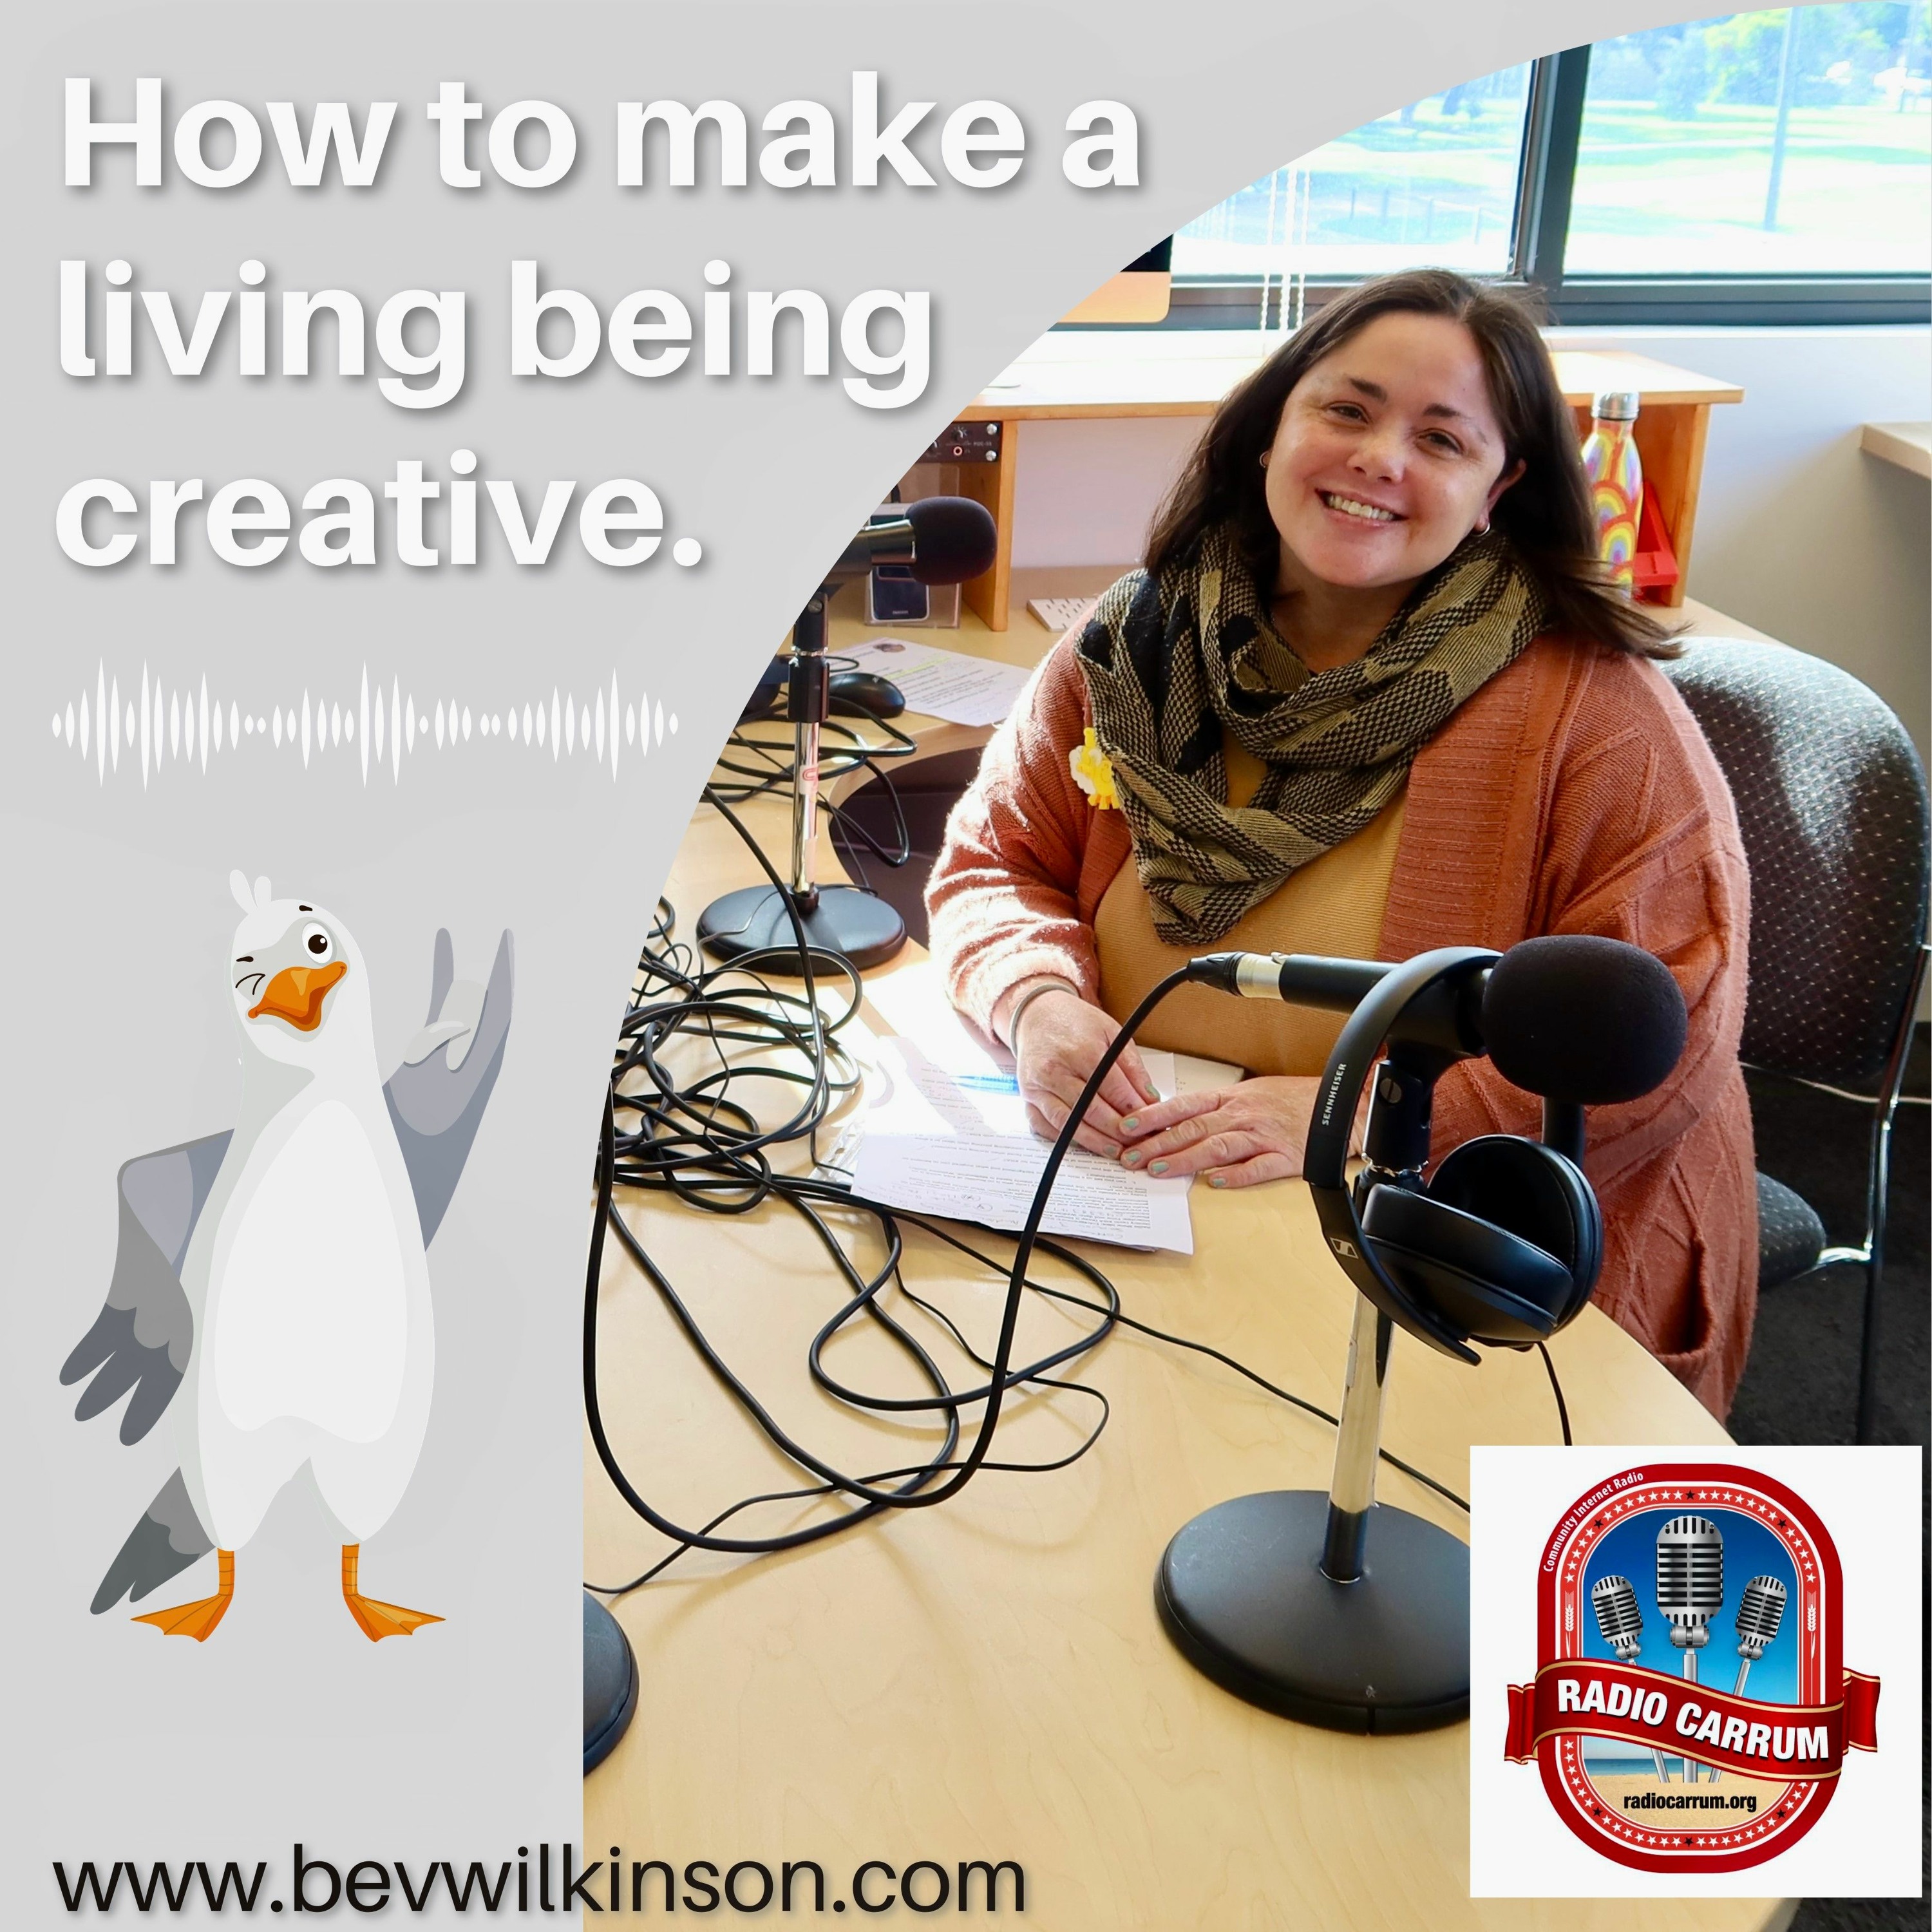 How To Make A Living Being Creative - Episode 3